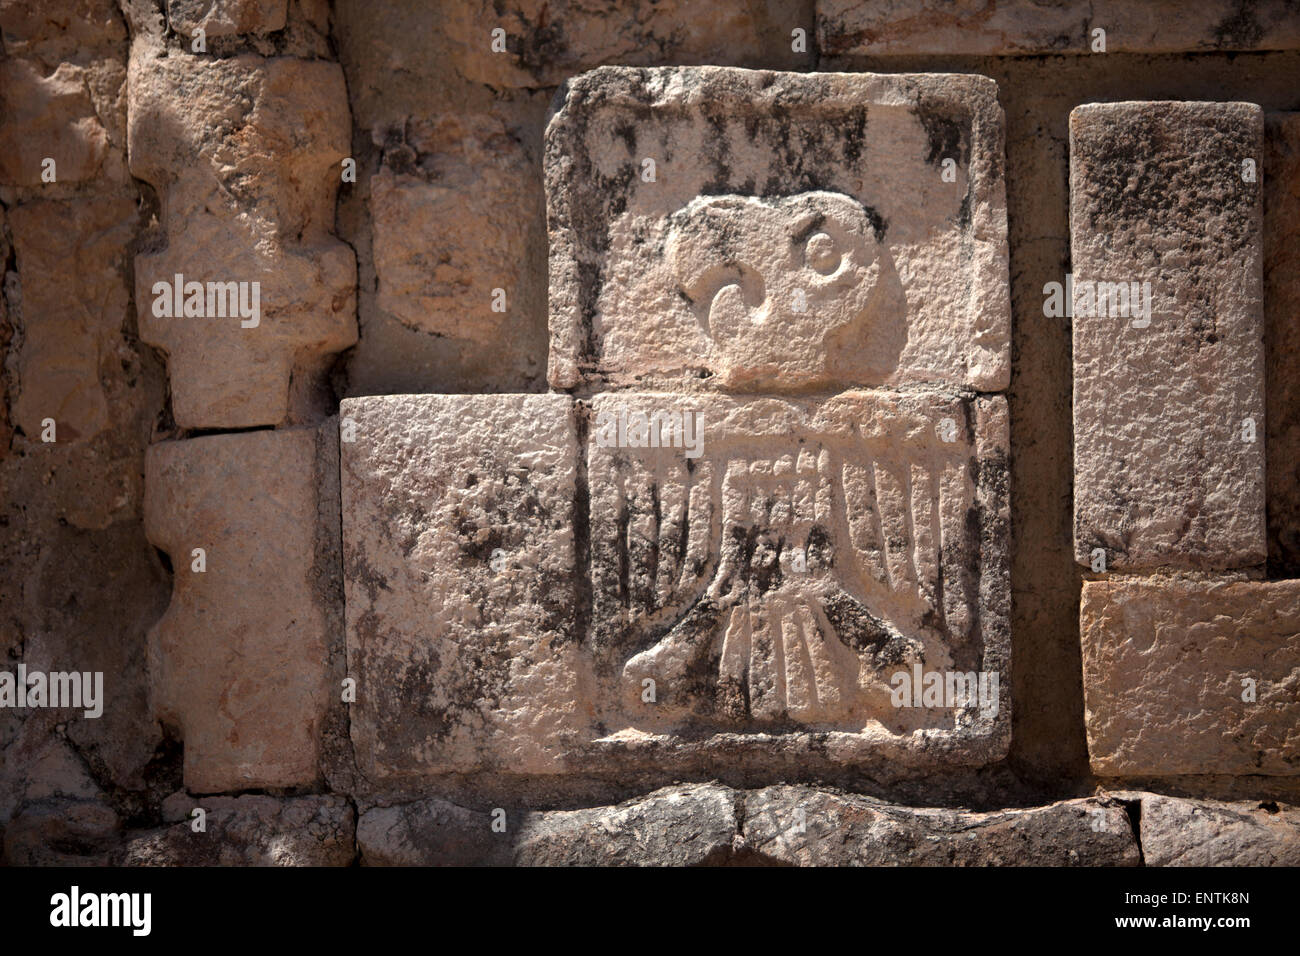 A stone relief with the image of a Guacamaya decorates a temple in the Mayan city of Uxmal, Yucatan Peninsula, Mexico Stock Photo